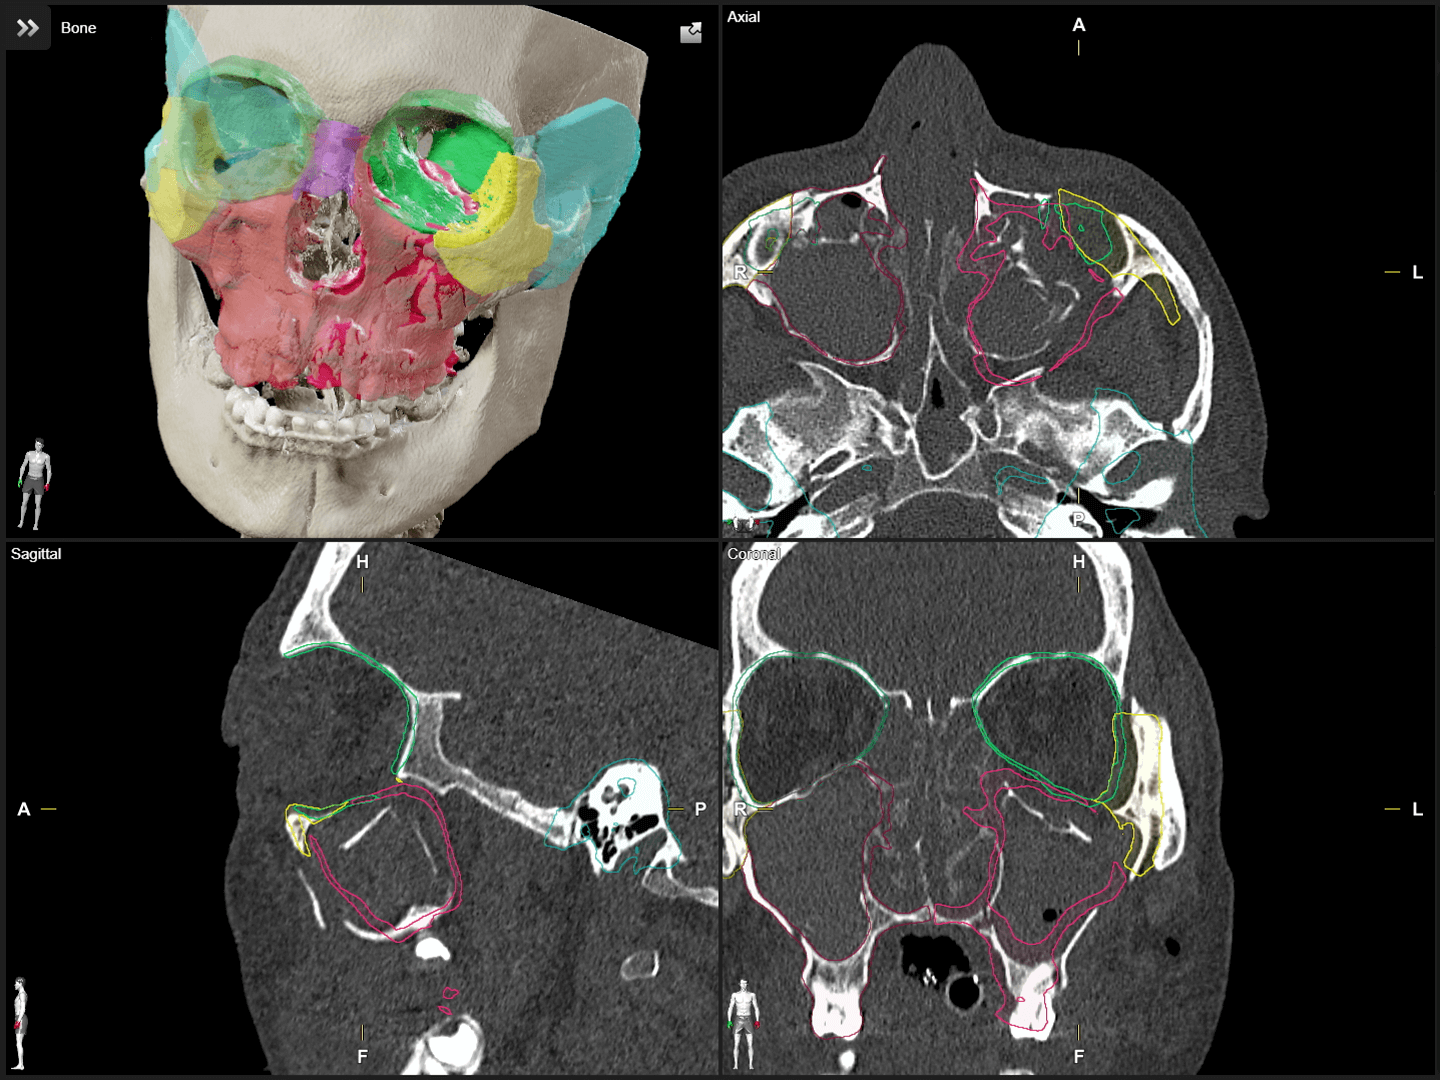 A screenshot of a grid view of four views of a skull with various bone structures highlighted in different colors for CMF surgery planning.